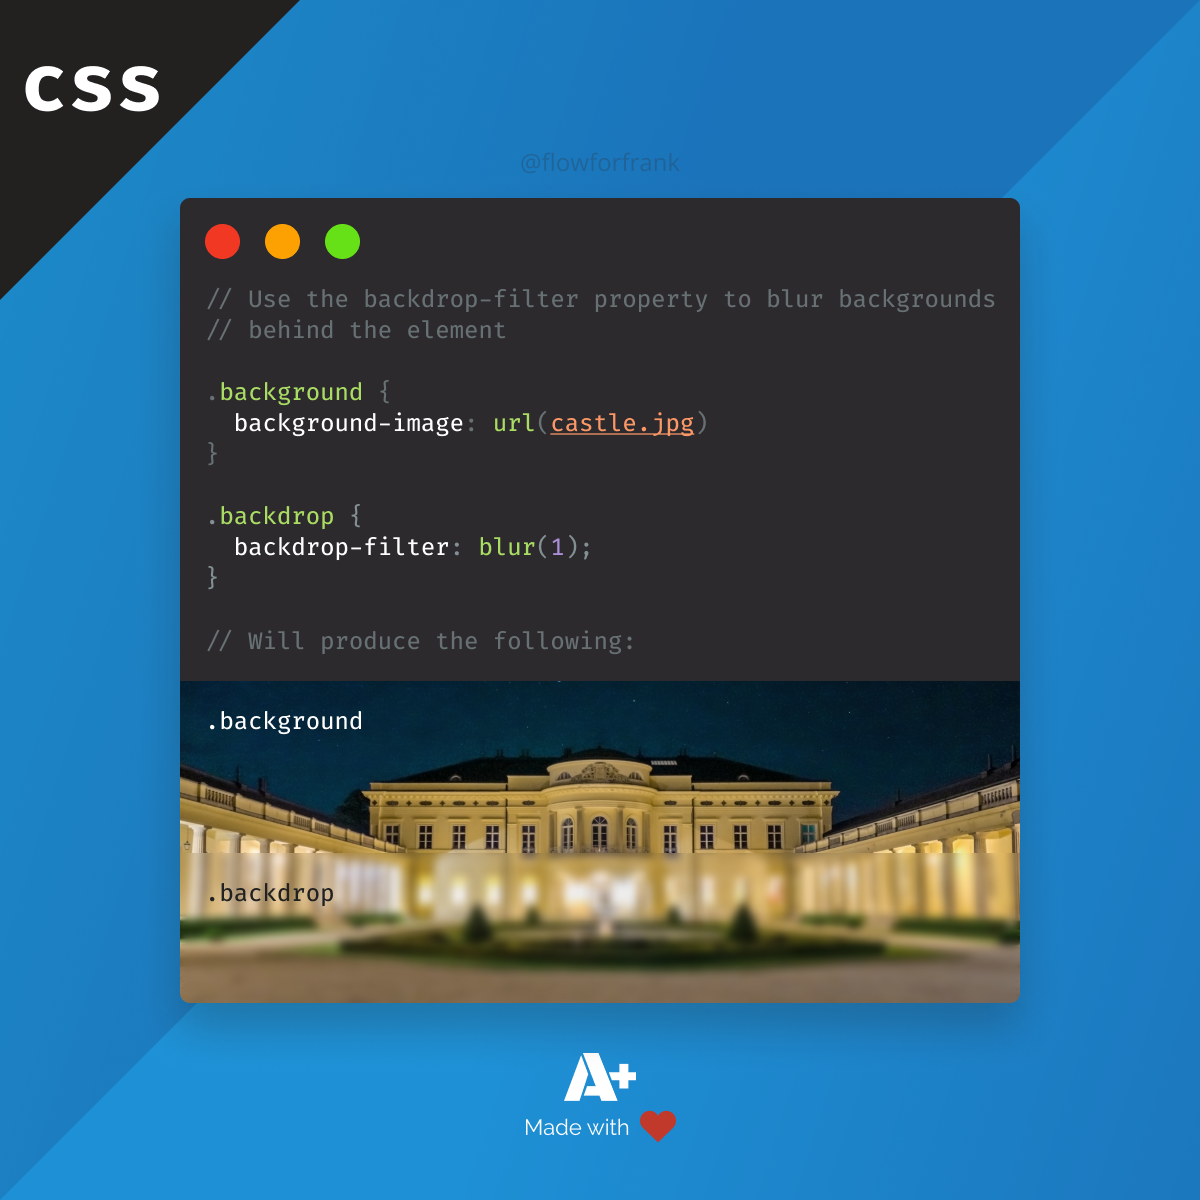 How to Blur Background Behind Elements in CSS - Webtips